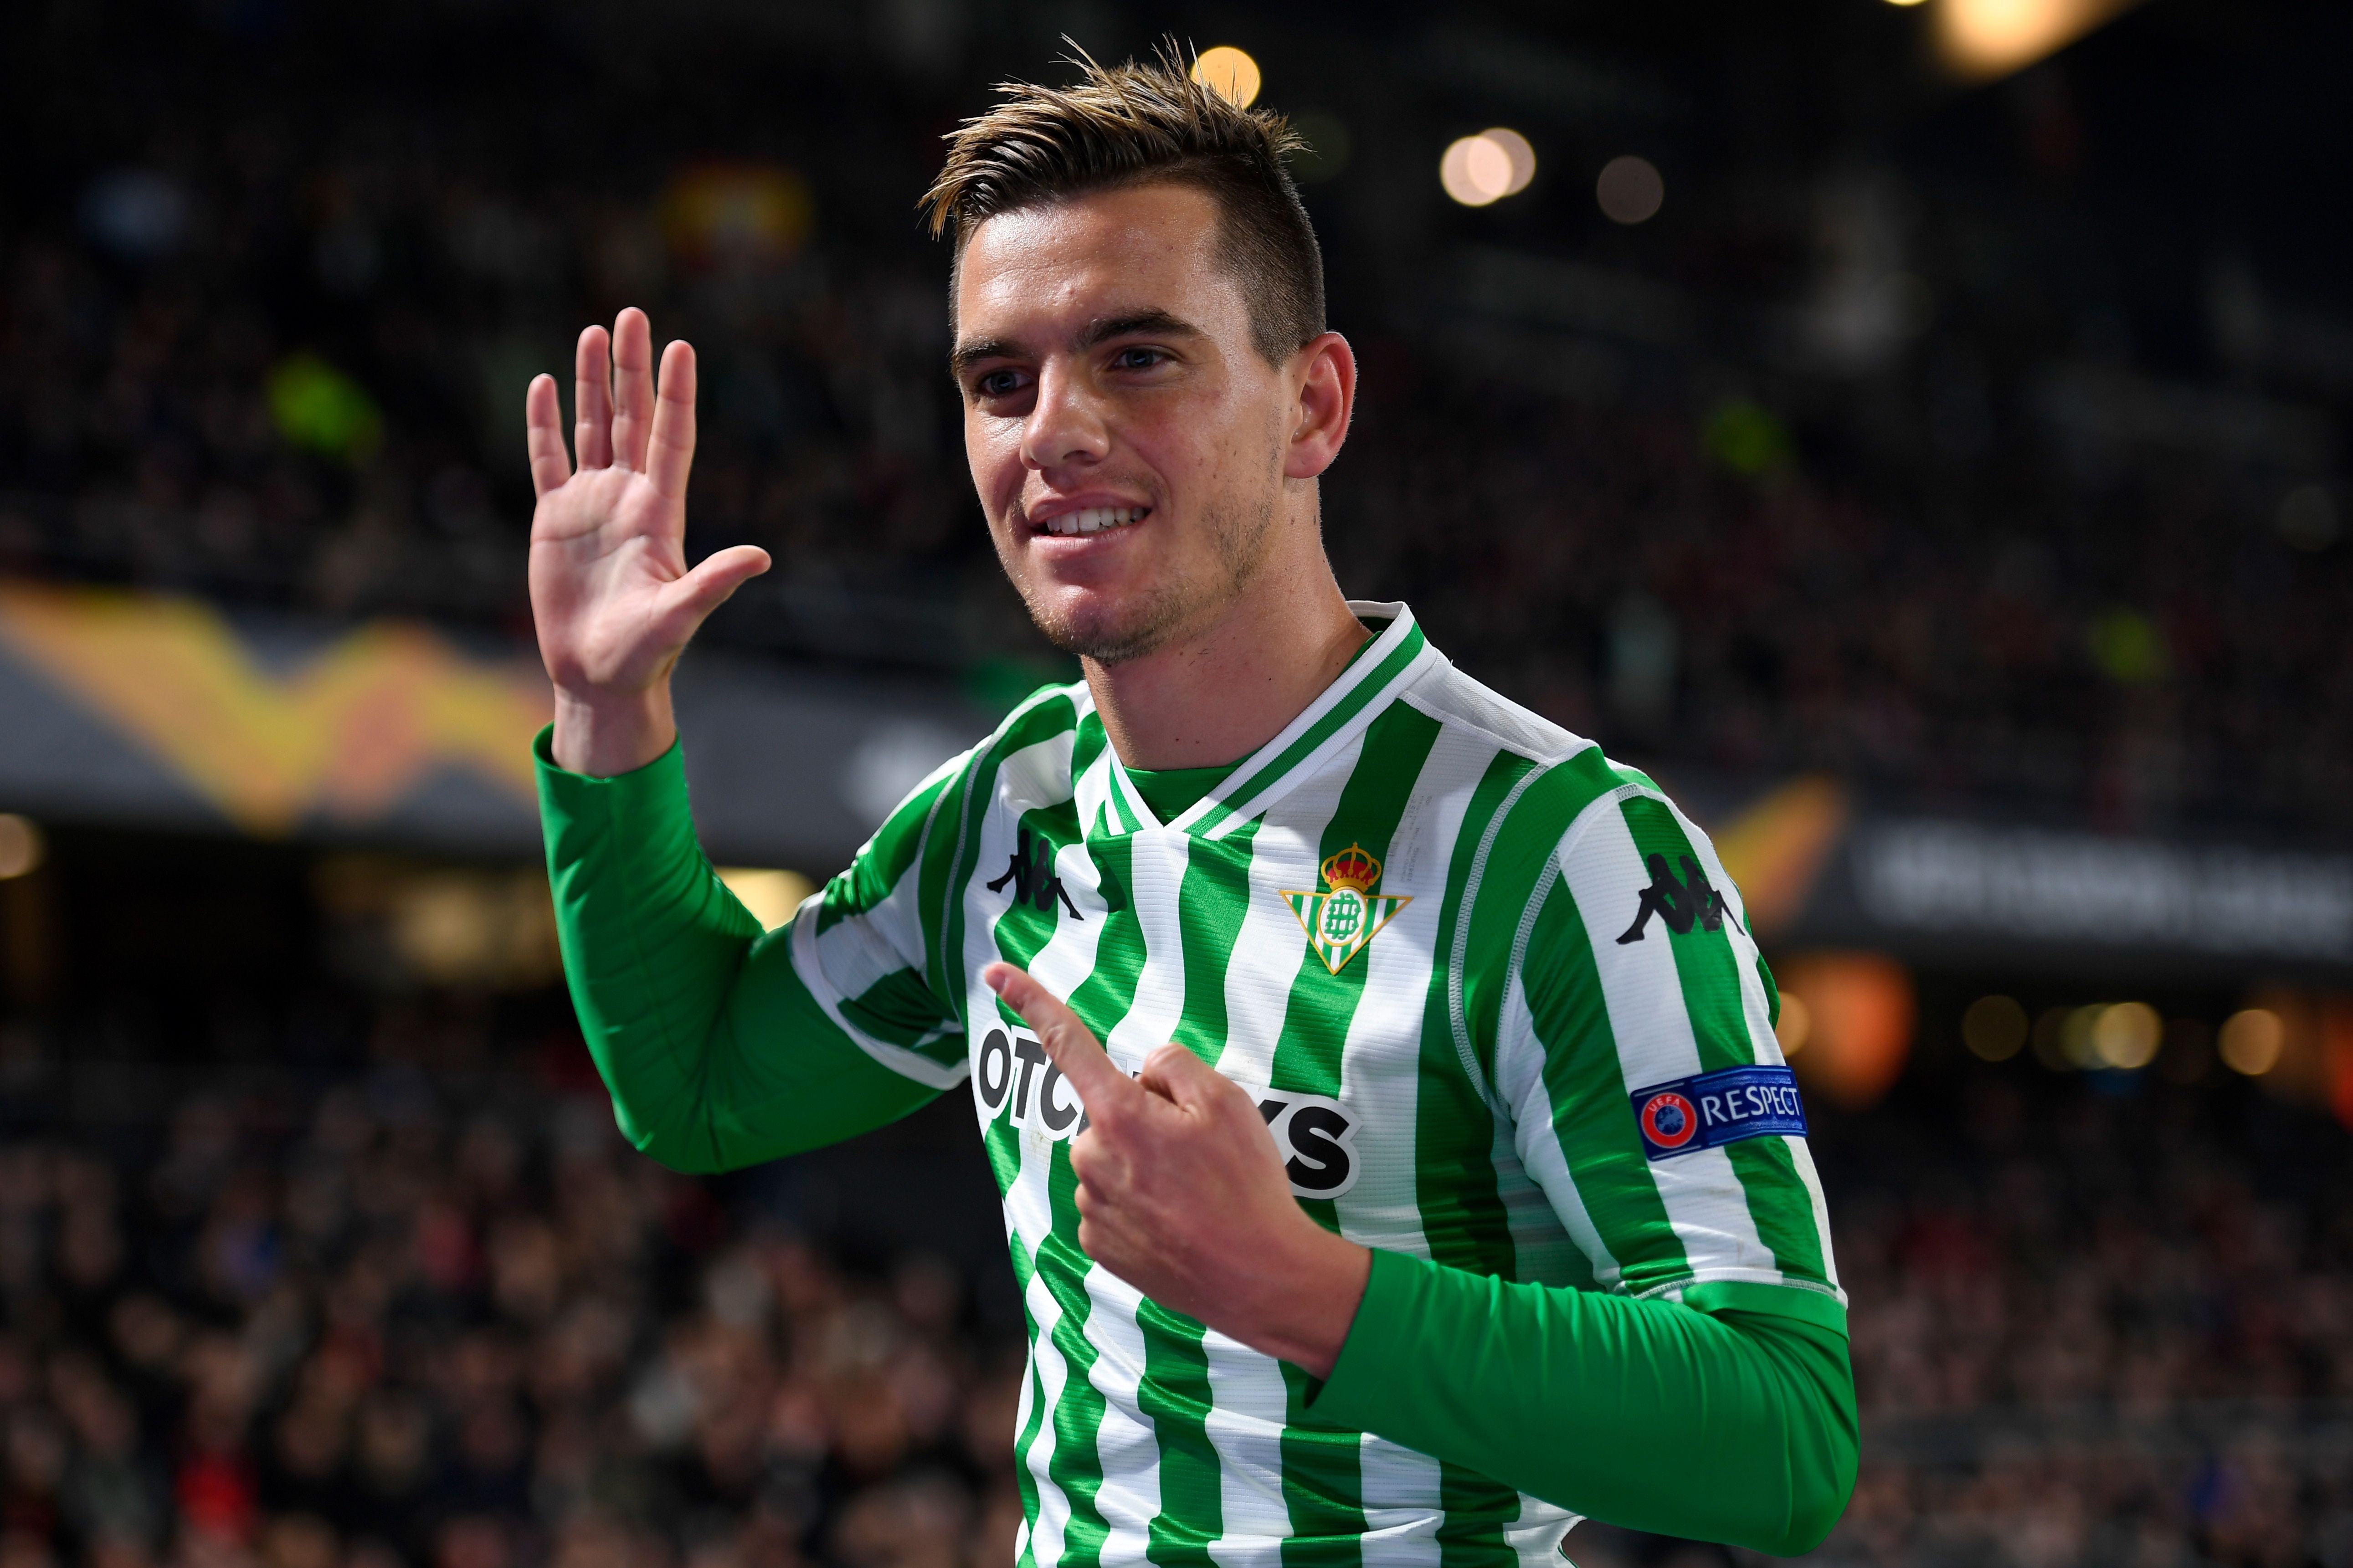 Real Betis' Spanish midfielder Giovanni Lo Celso  celebrates after scoring a goal  during the UEFA Europa League round of 32 first-leg football match between Rennes and Real Betis at the Roazhon Park stadium in Rennes, western France, on February 14, 2019. (Photo by DAMIEN MEYER / AFP)        (Photo credit should read DAMIEN MEYER/AFP/Getty Images)